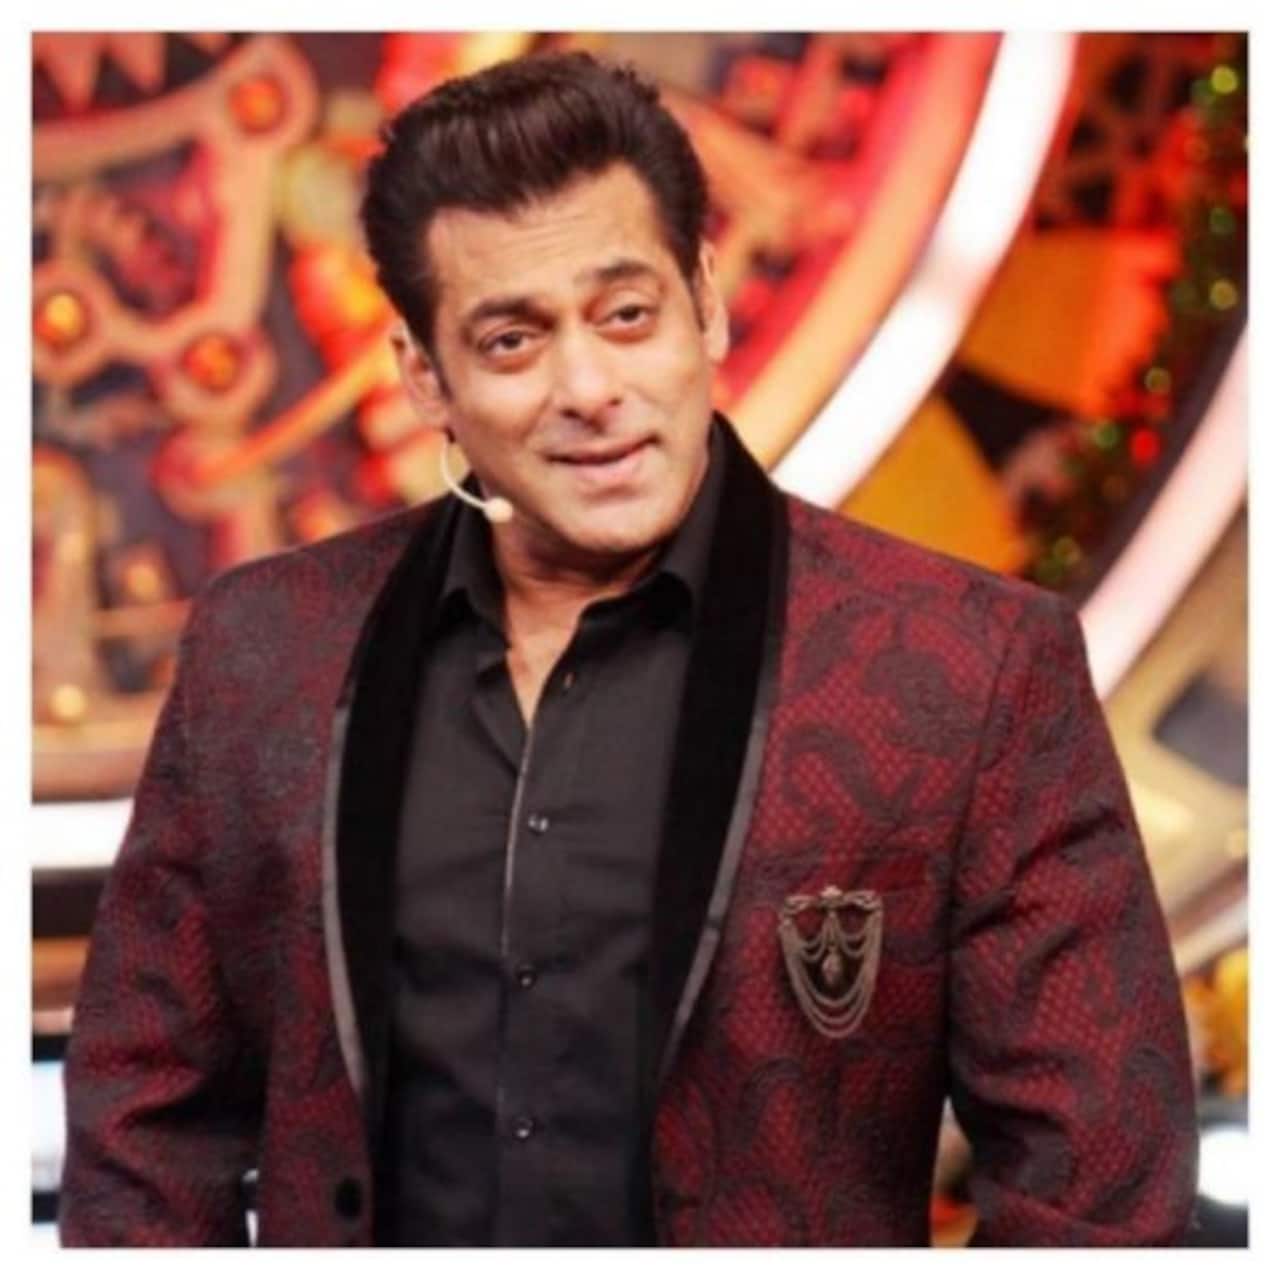 Bigg Boss 13: Salman Khan reveals there’s still time for his marriage, calls himself a virgin again